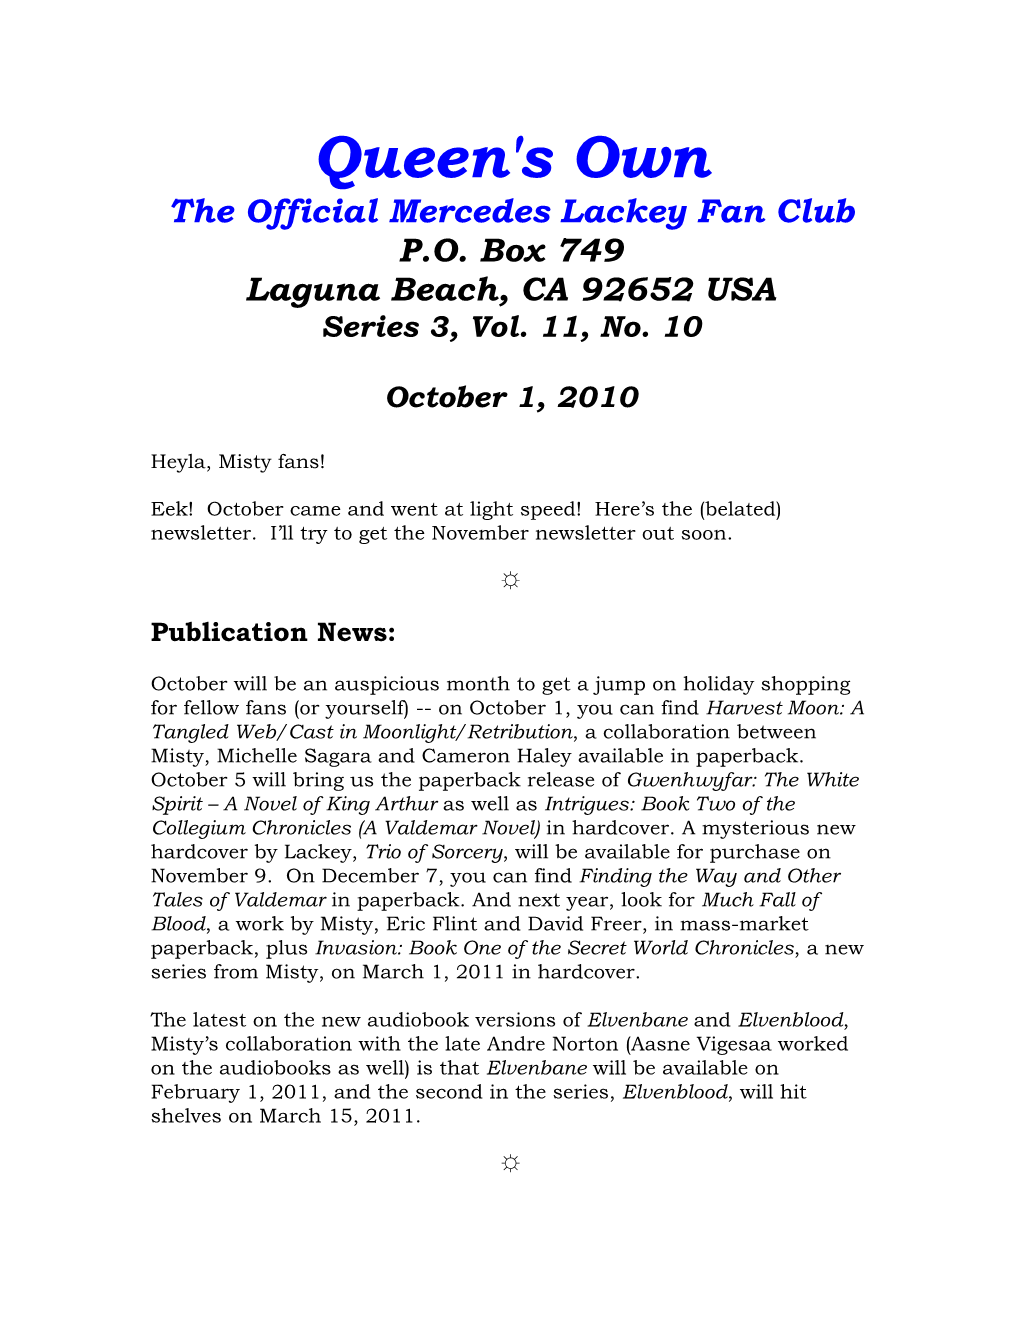 Queen's Own the Official Mercedes Lackey Fan Club P.O